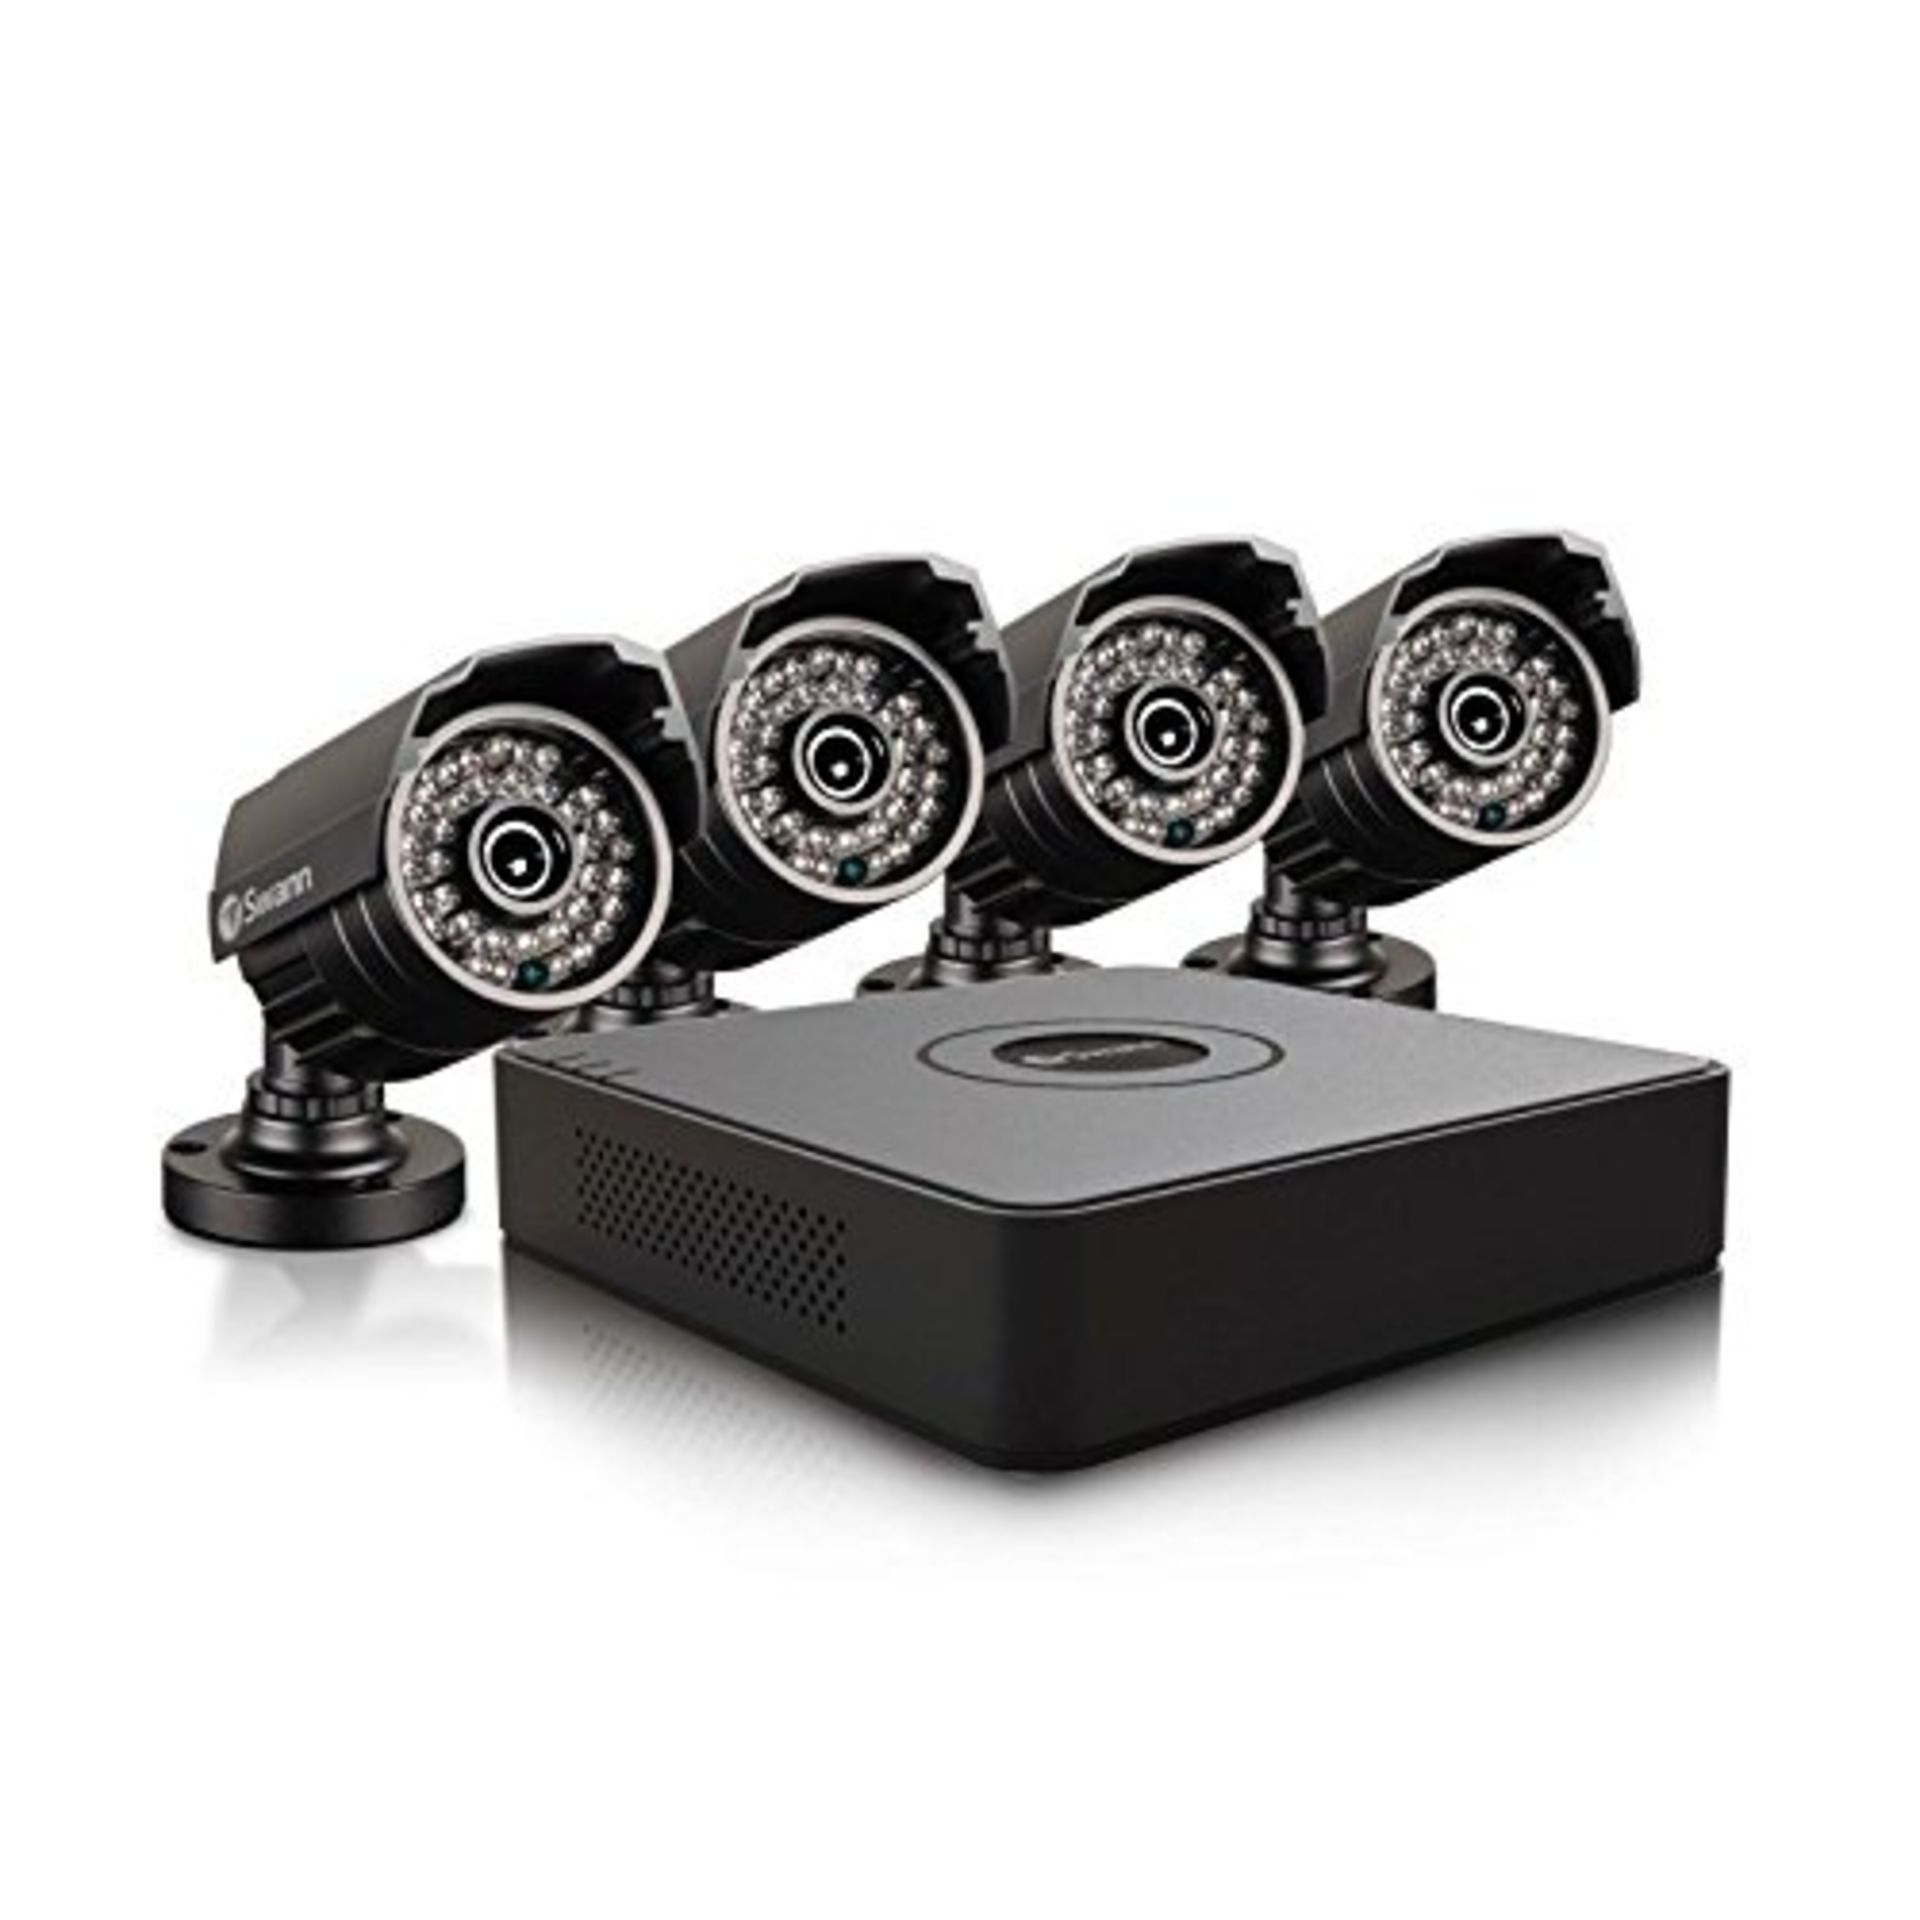 V Grade A Swann Model 81404S 8 Channel Digital Video Security System With Recorder And 4 Pro Cameras